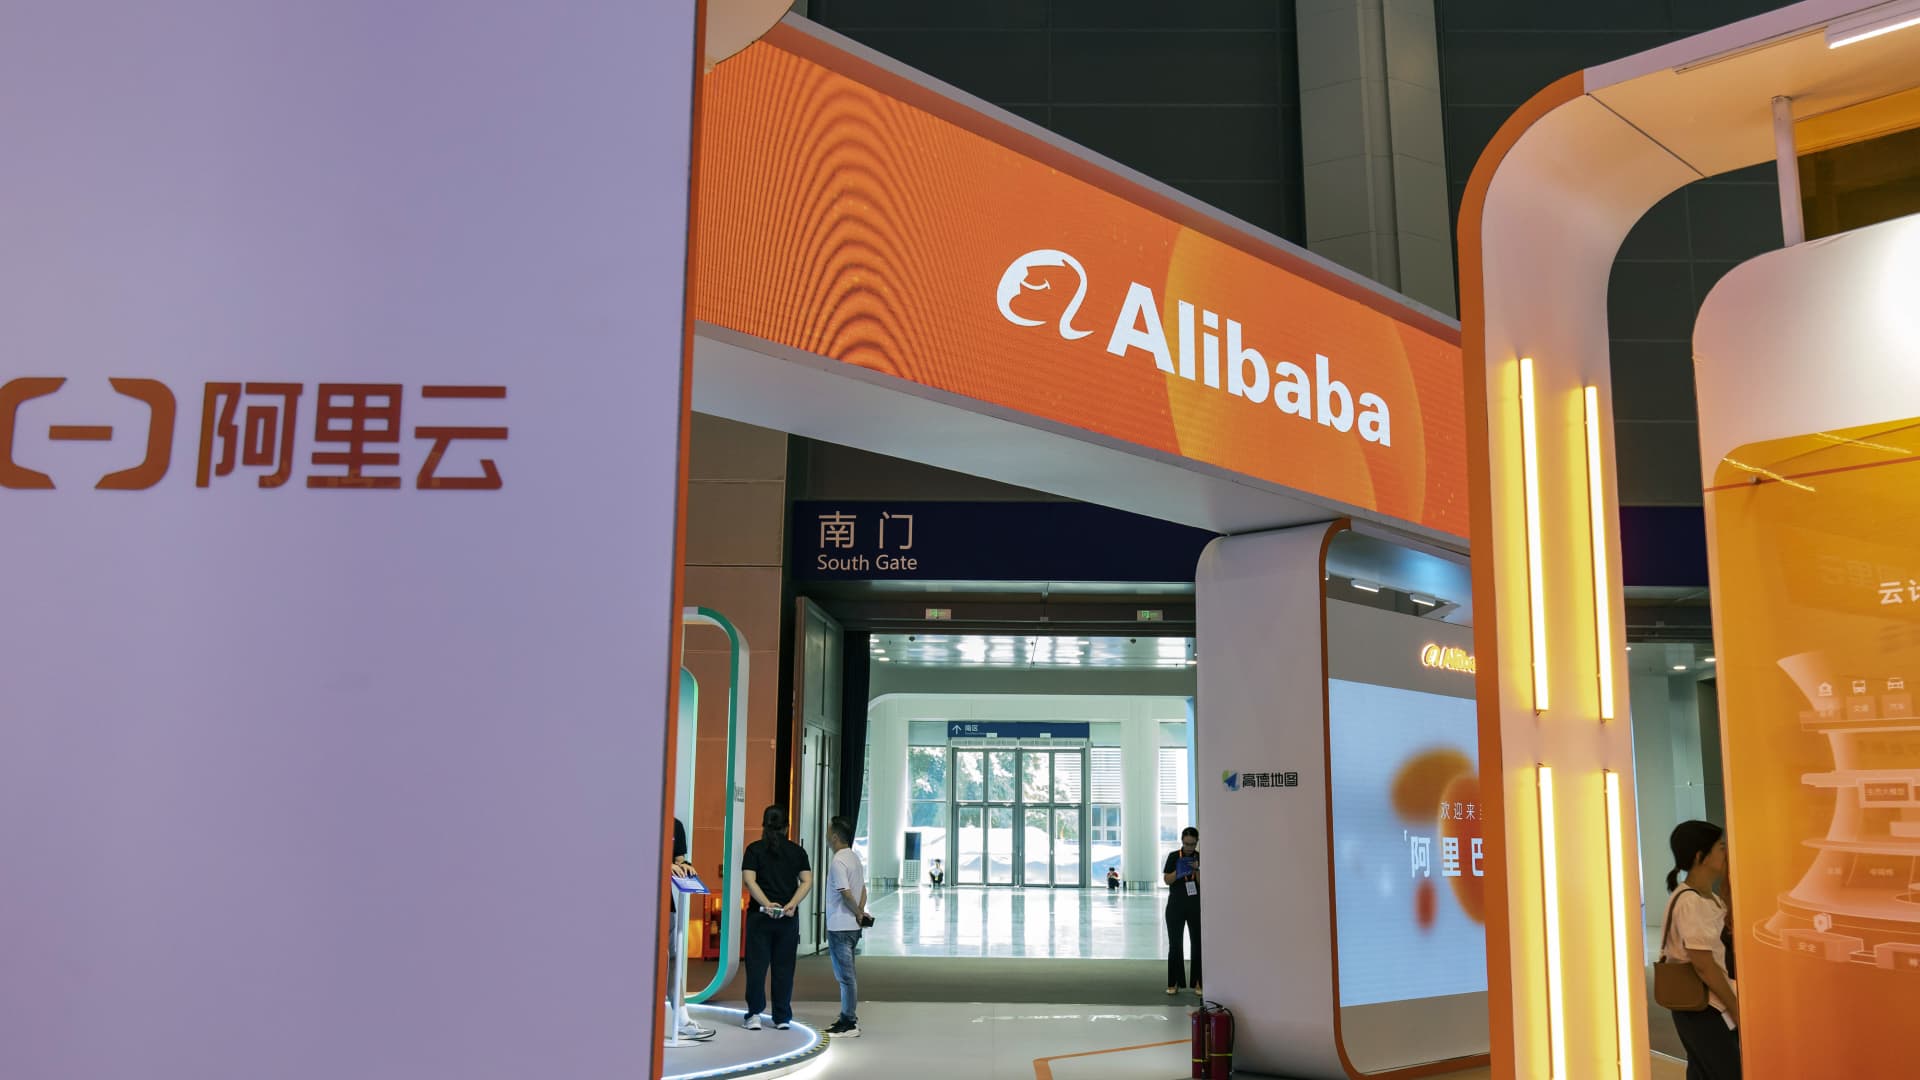 Alibaba shares slide 5% after it disappoints on profit, curbs cloud spinoff